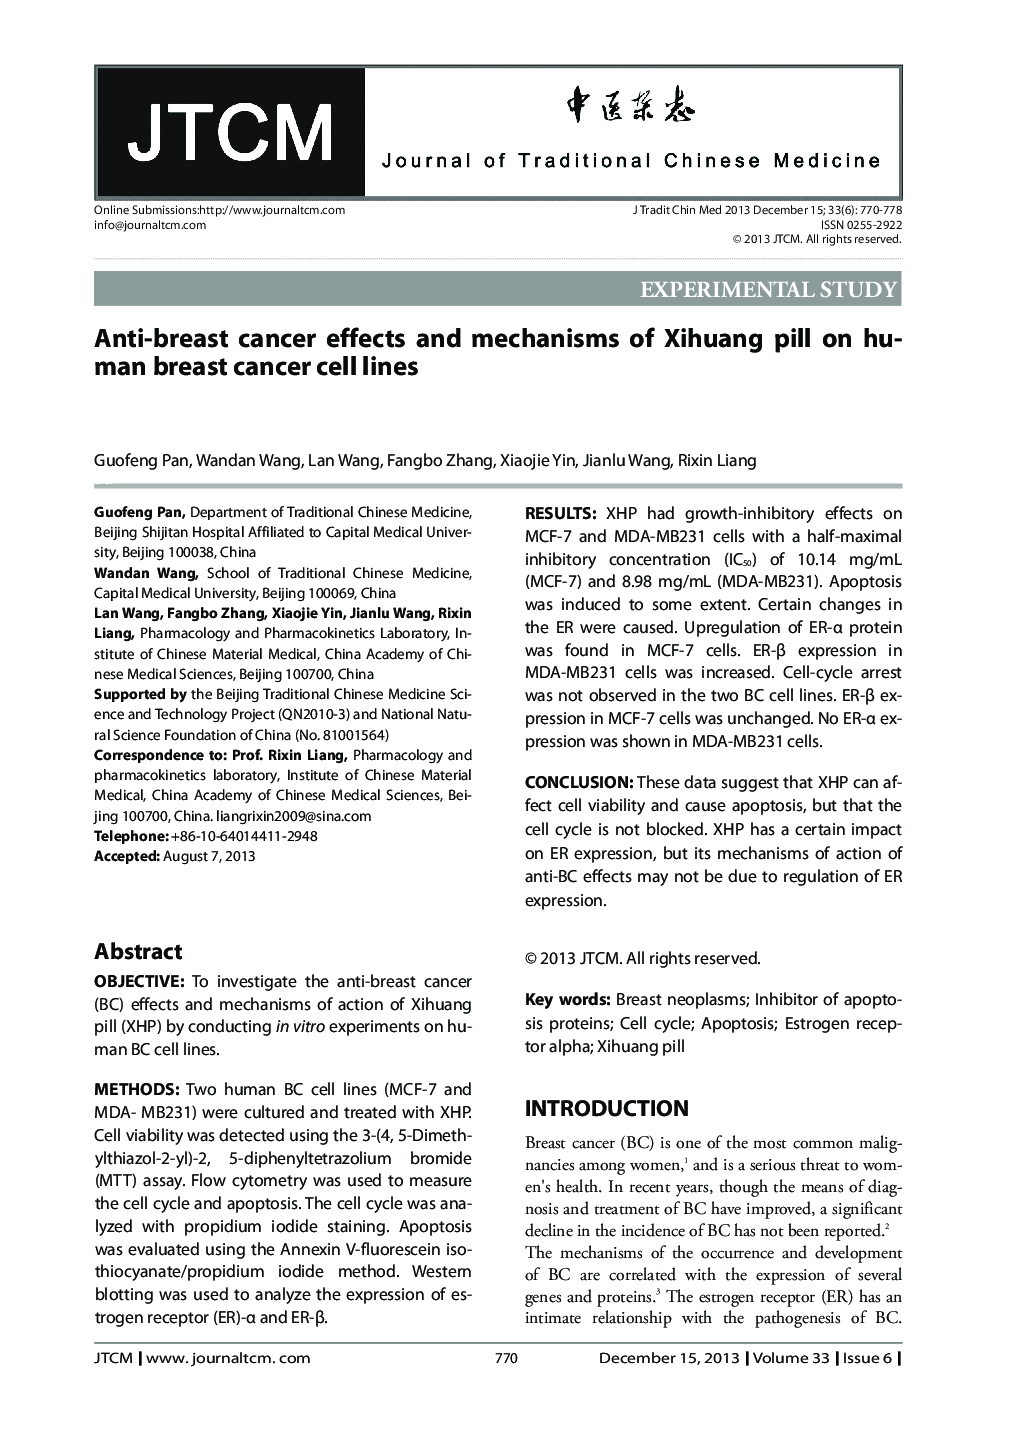 Anti-breast cancer effects and mechanisms of Xihuang pill on human breast cancer cell lines 